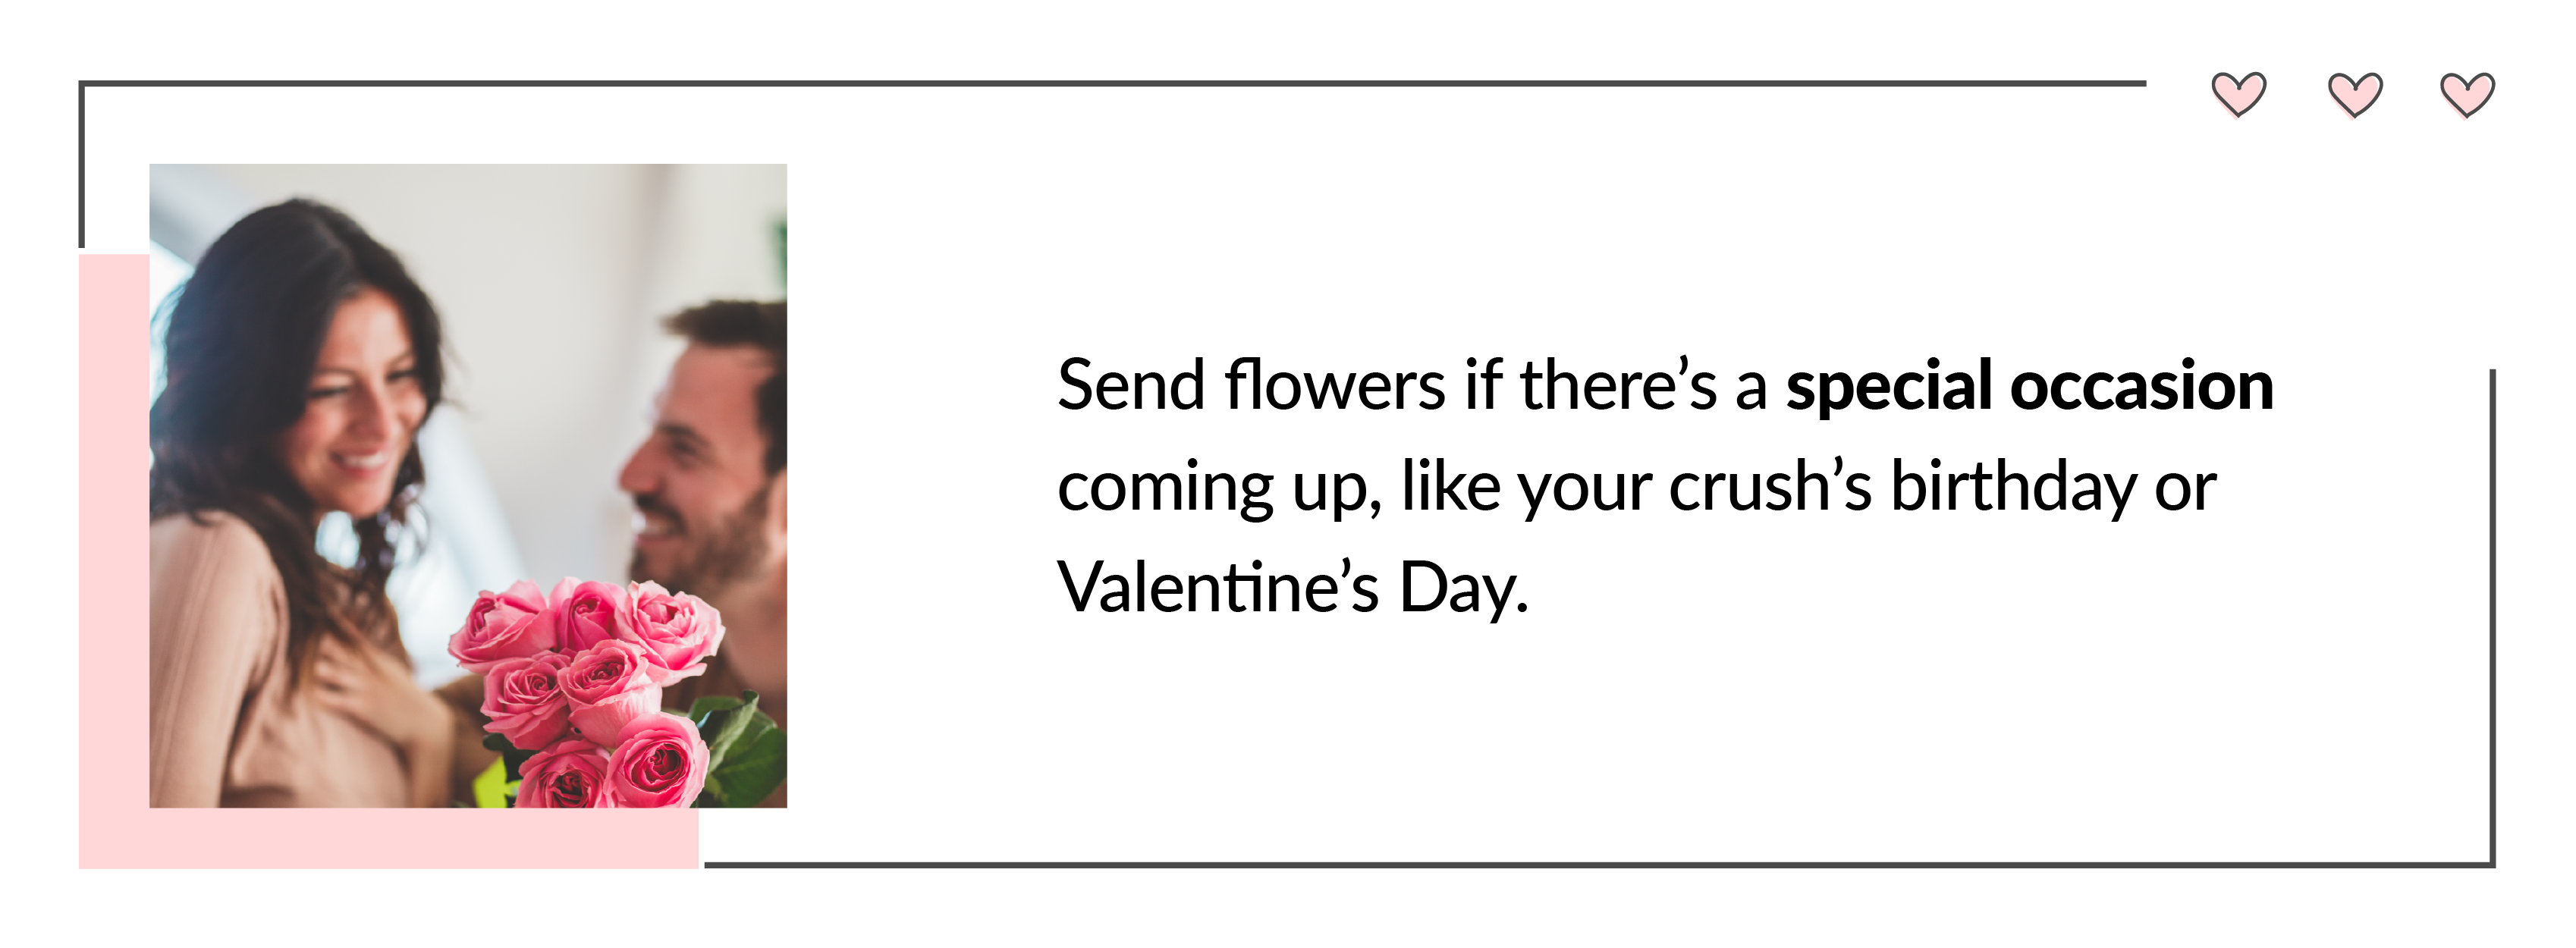 Send flowers for a special occasion